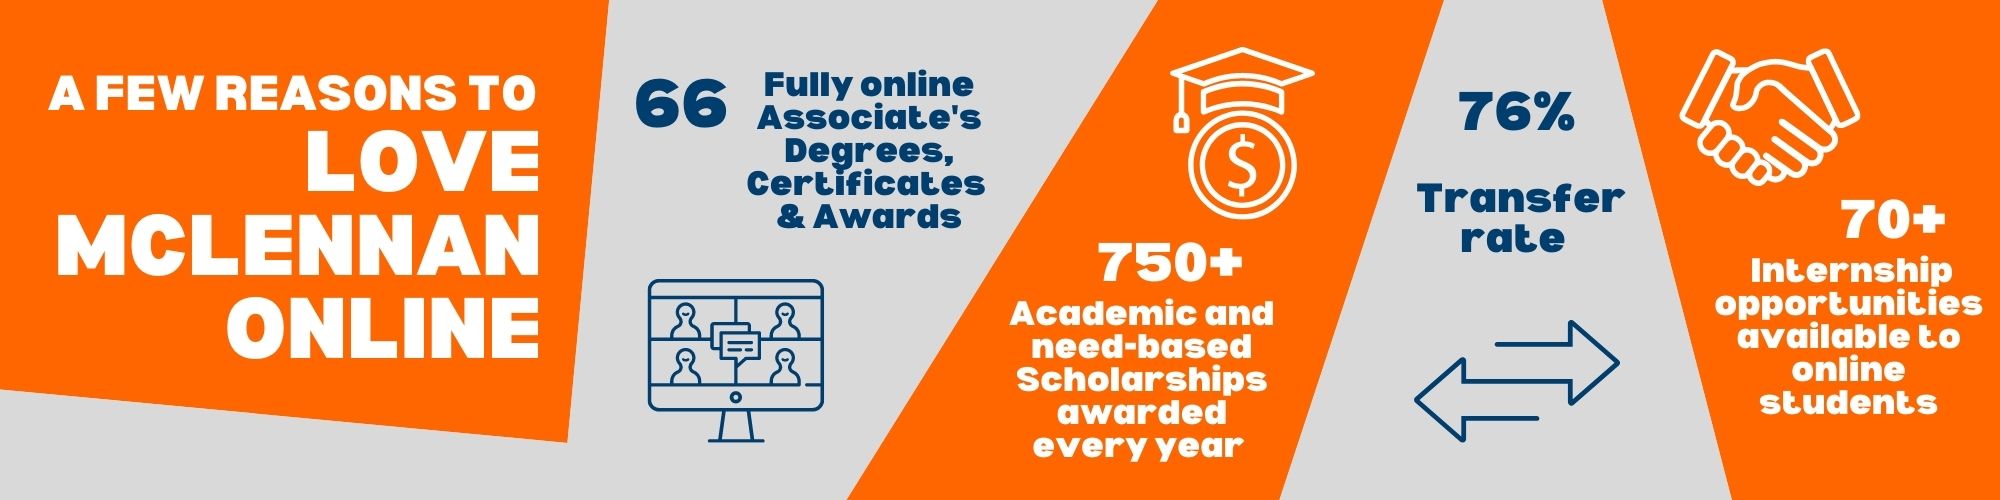 Online Banner - A Few Reasons to Love McLennan Online. 66 Fully online Associate Degrees, Certificates and Awards. 750+ Academic and need-based scholarship awarded every year. 75% transfer rate. 70+ internship opportunities available to online students.